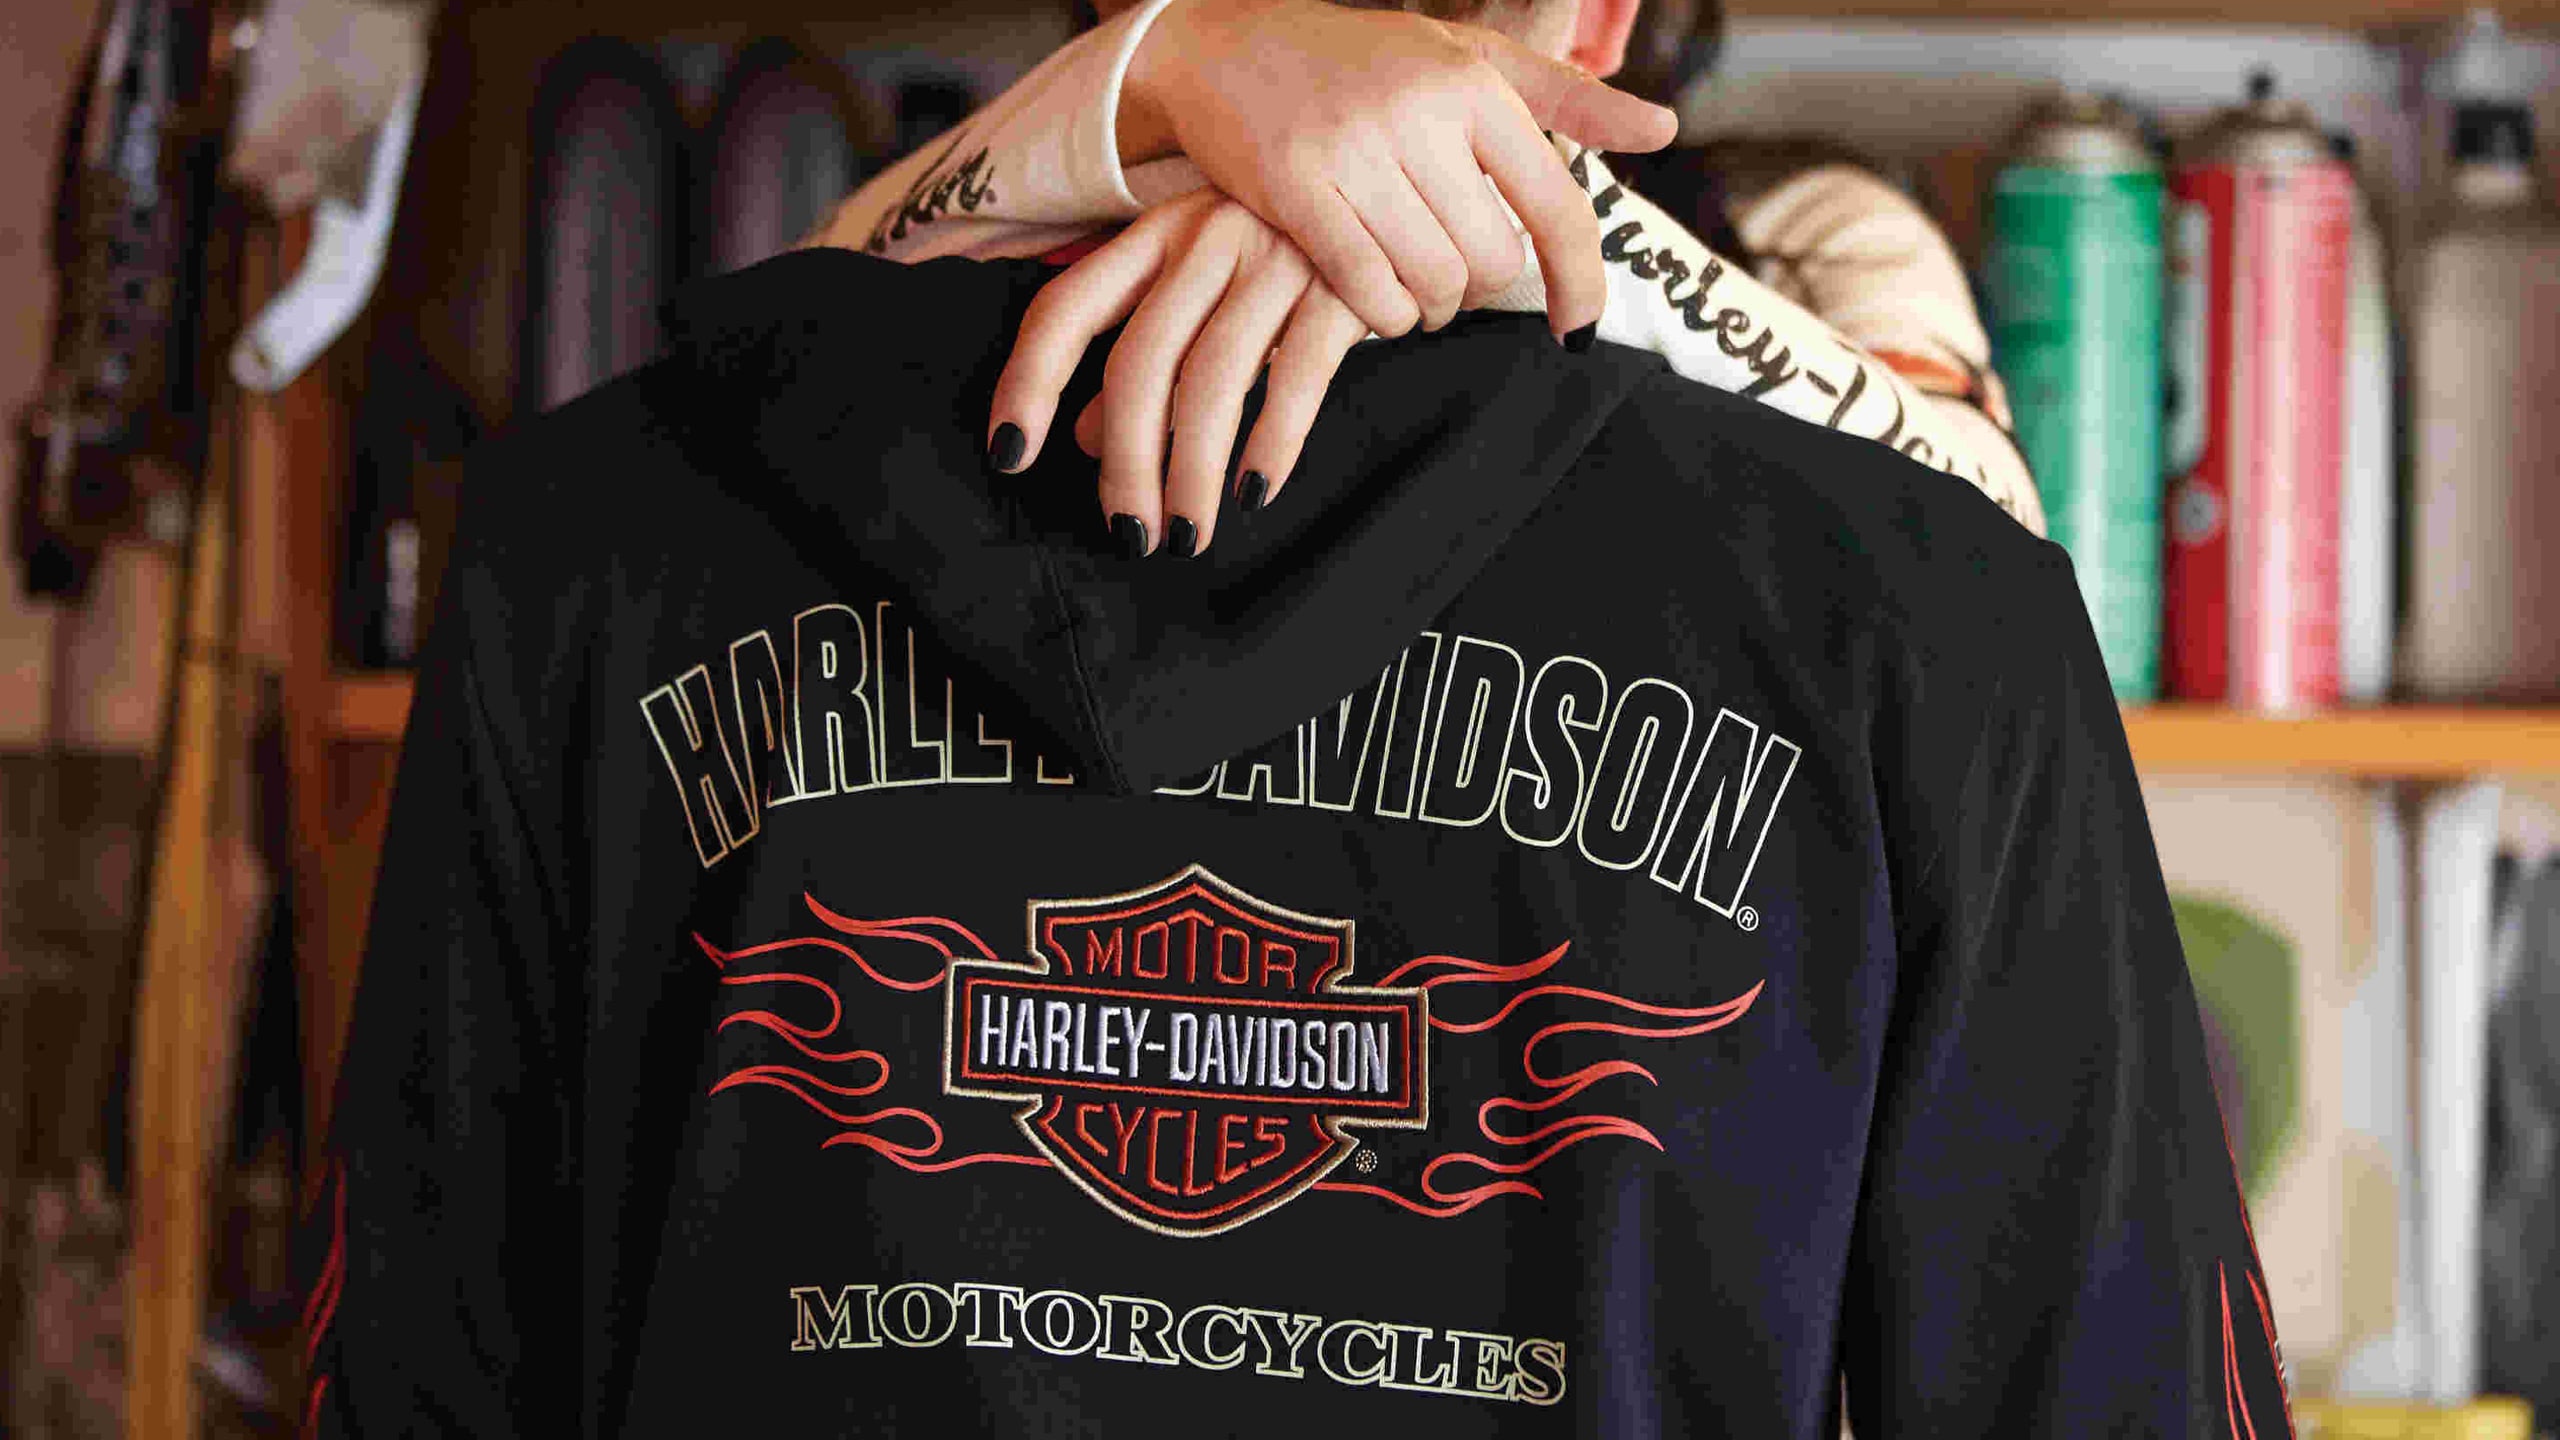 Harley Davidson Launches New Apparel Collection Targeting Motorcycle Enthusiasts Retail News Usa